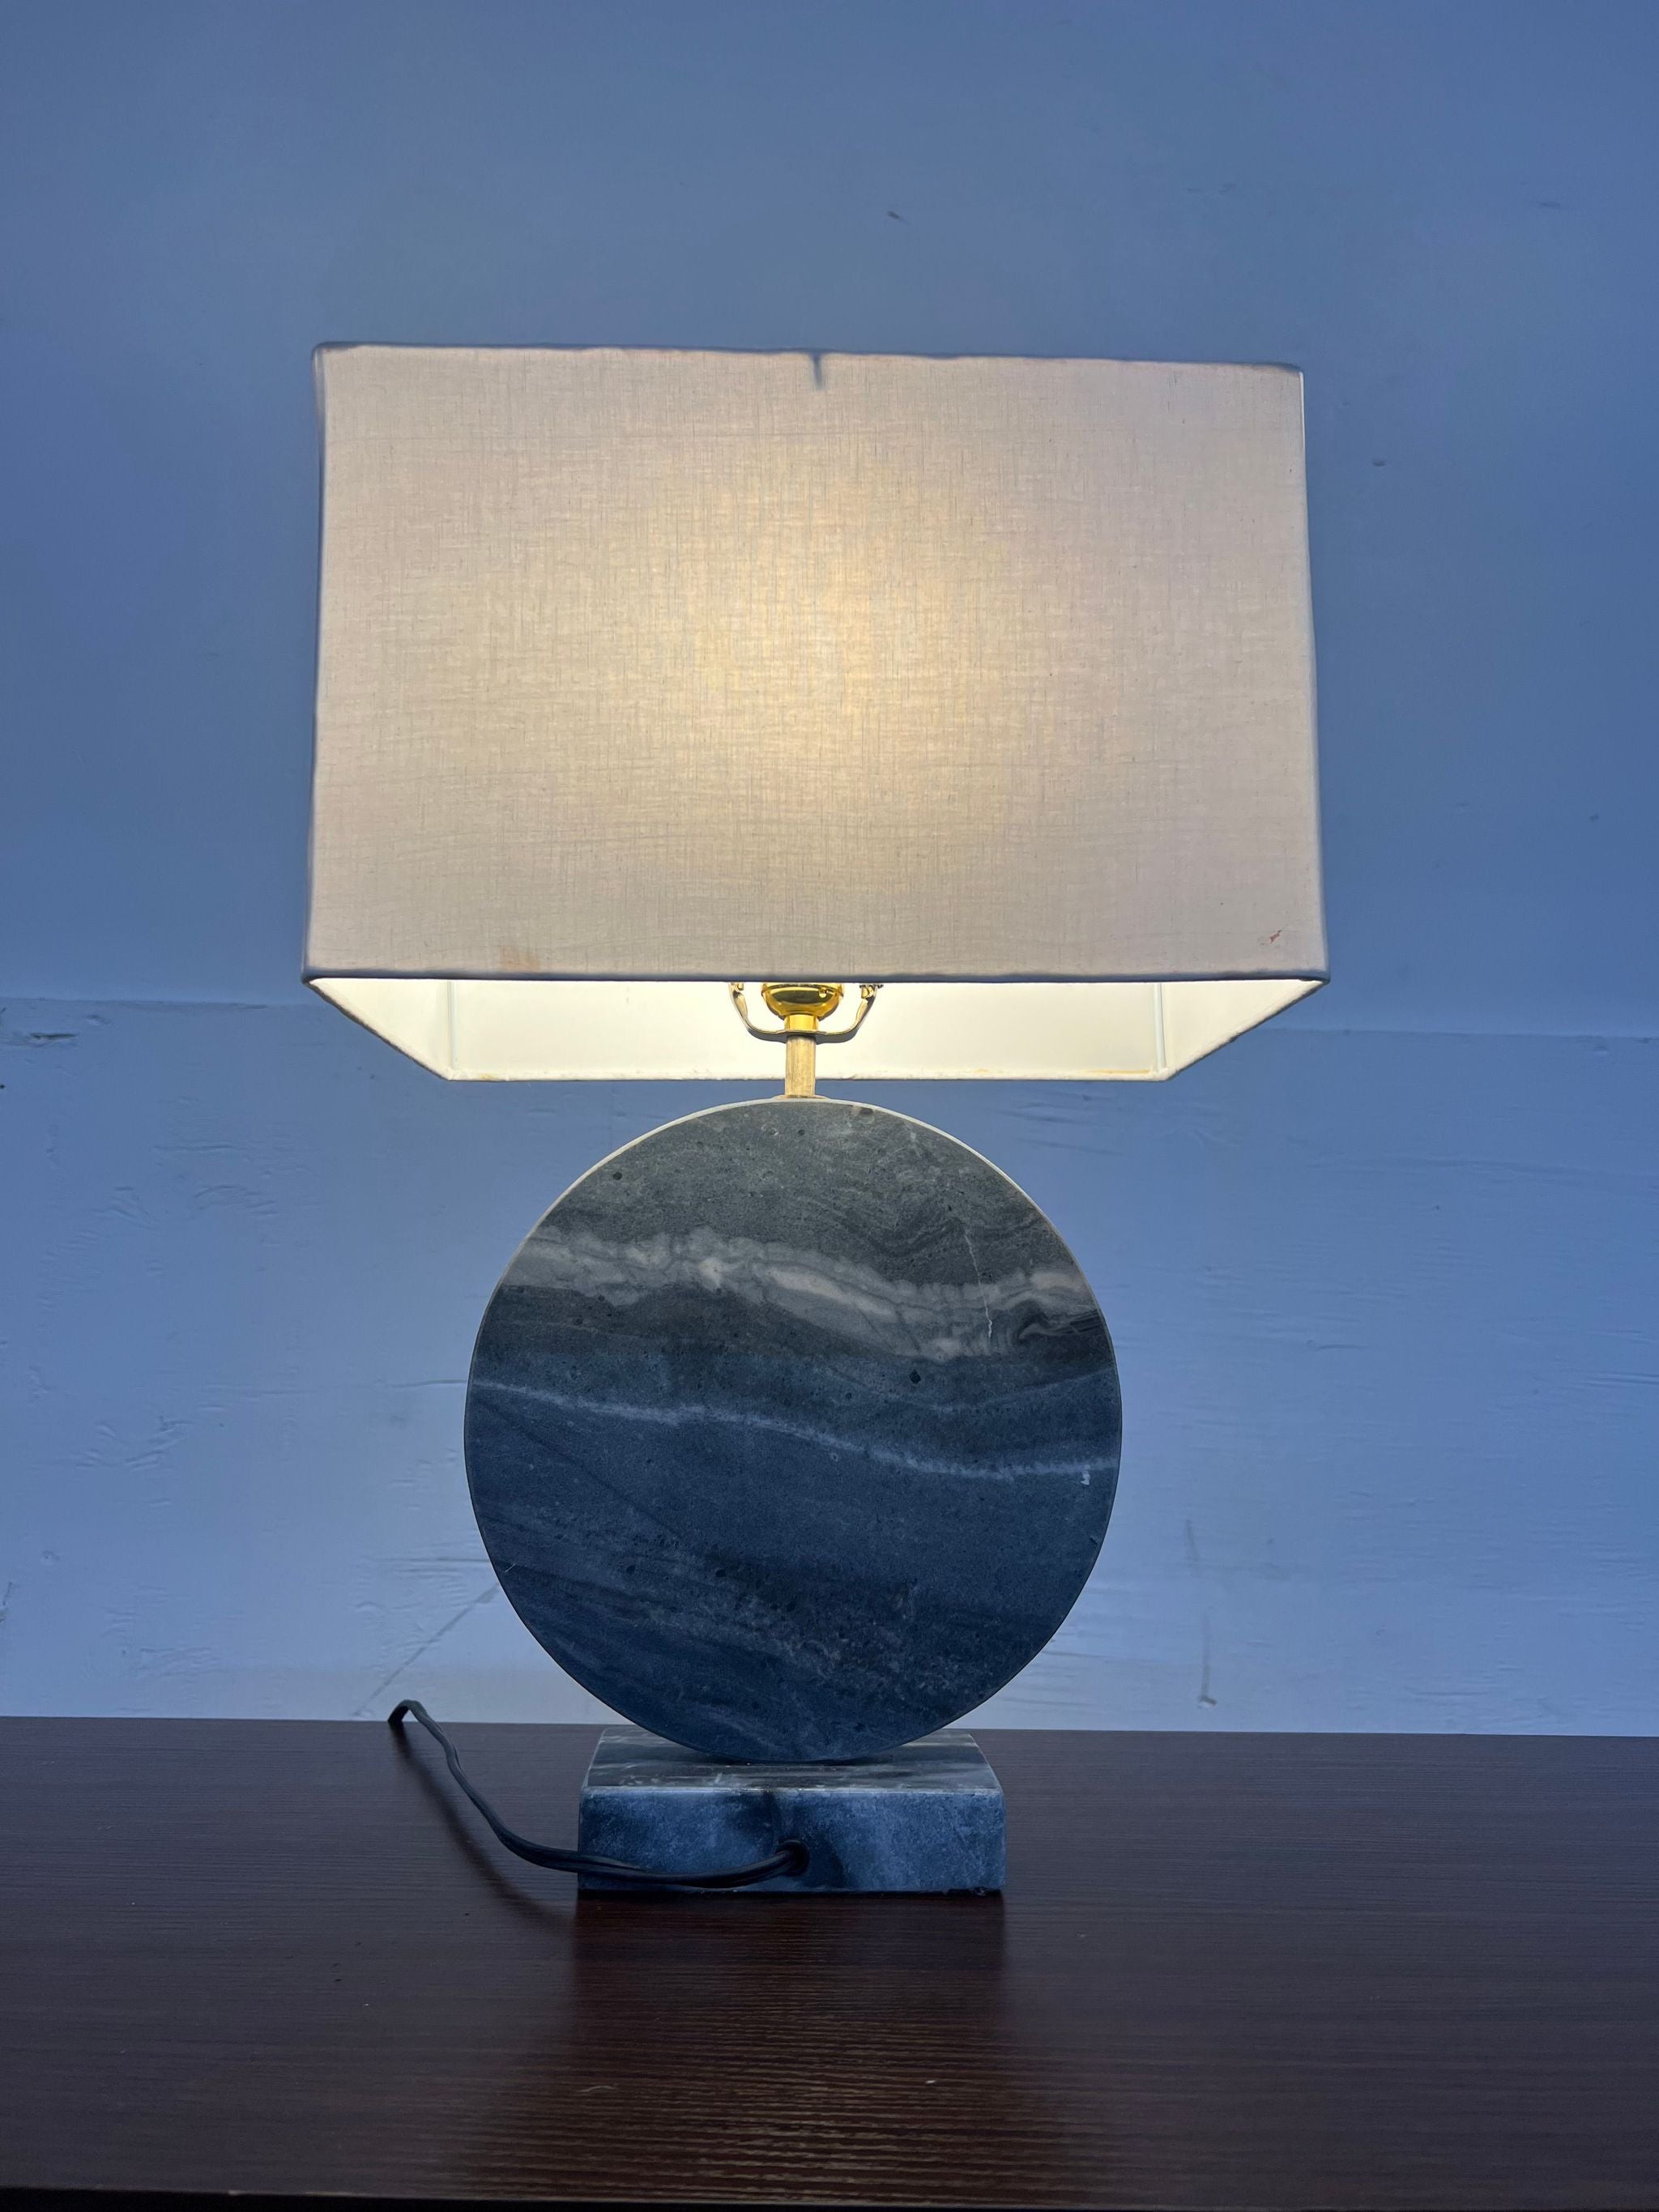 Illuminated Reperch brand table lamp with a fabric shade and round polished marble base on a wooden surface.